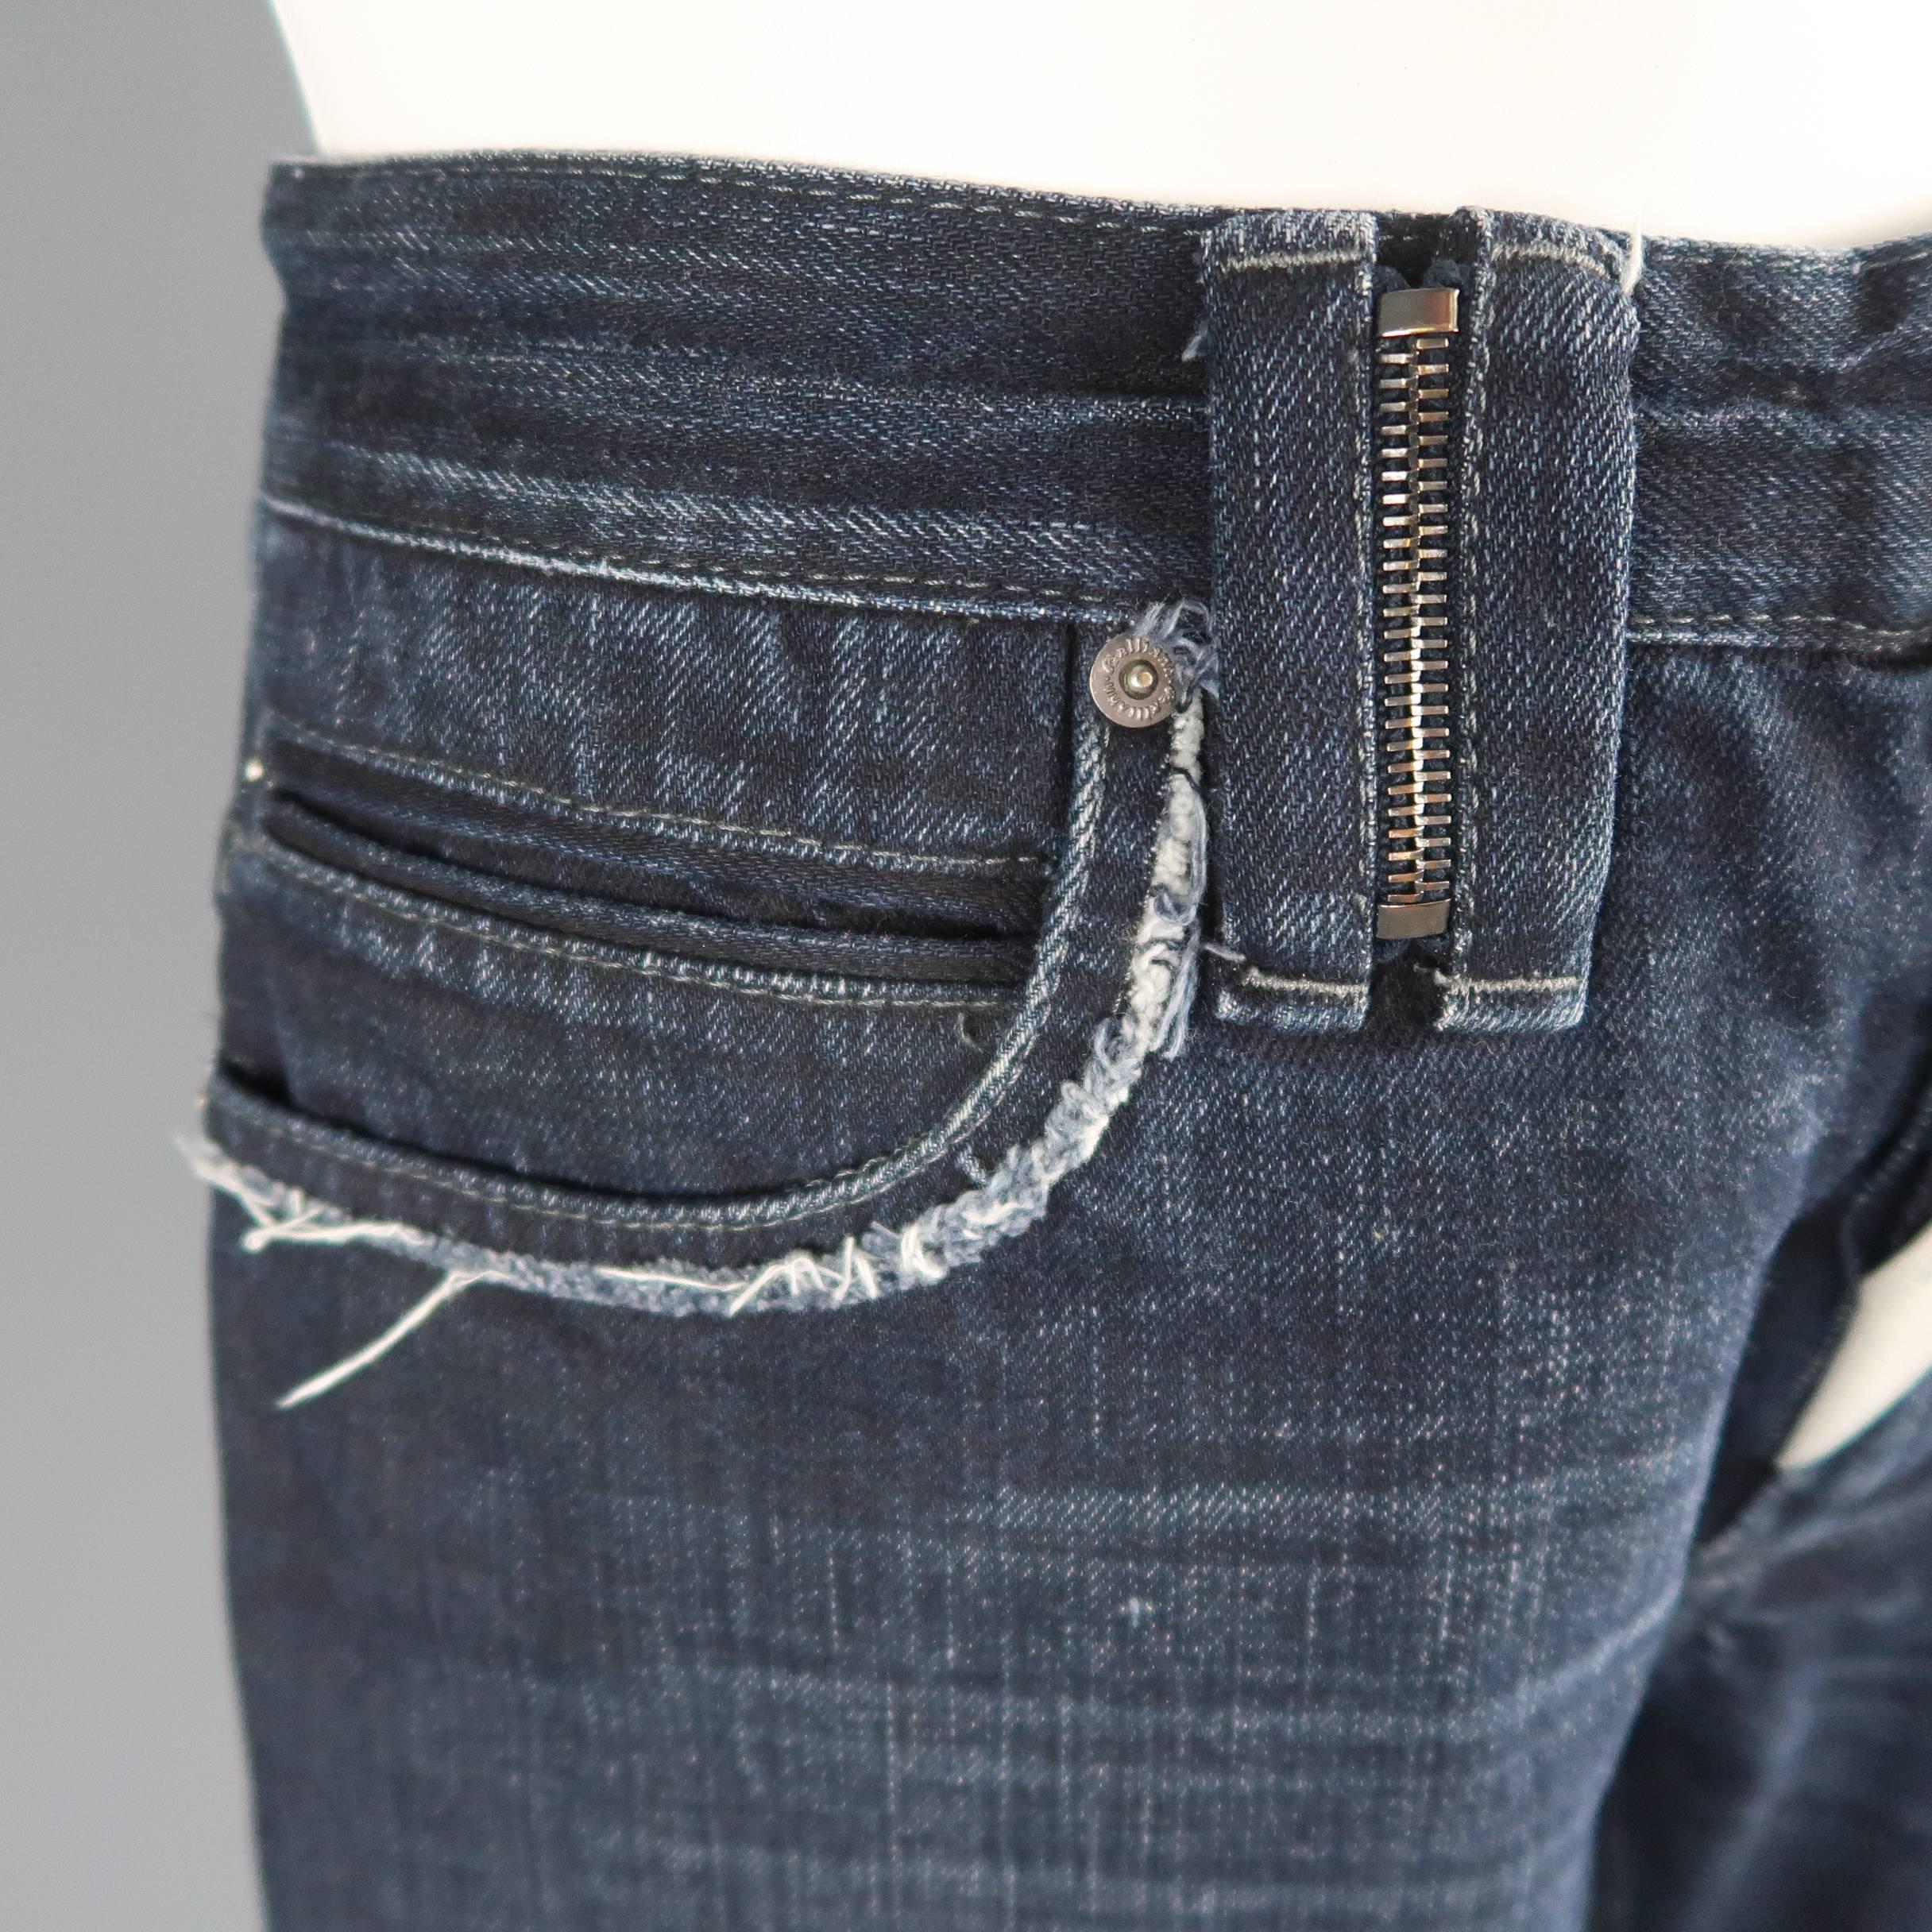 mens jeans with bling on back pockets